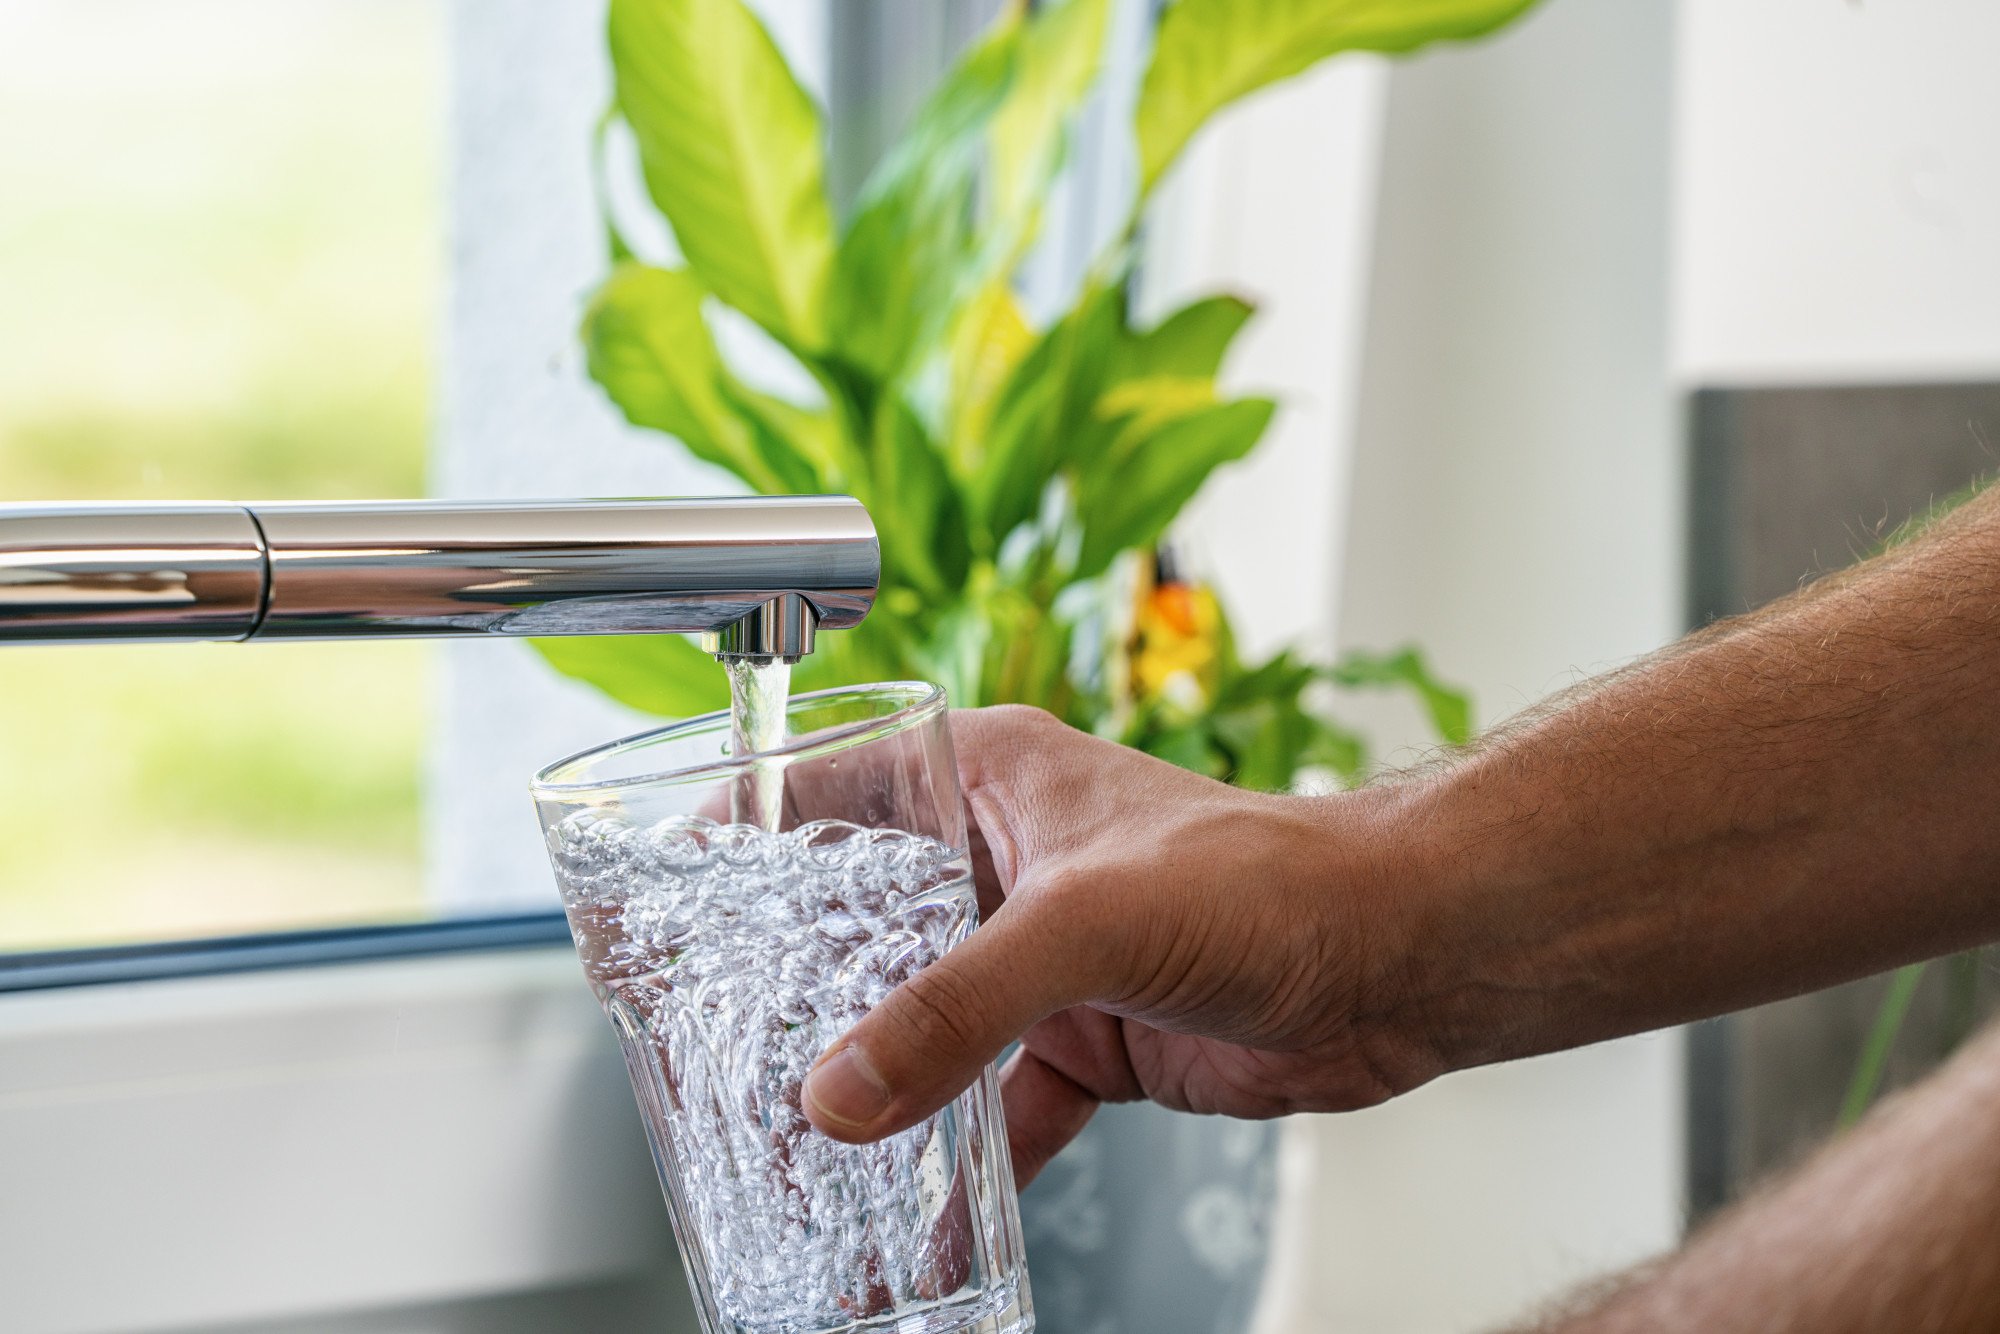 Faucet Water: 7 Key Signs Your Drinking Water Isn't Clean